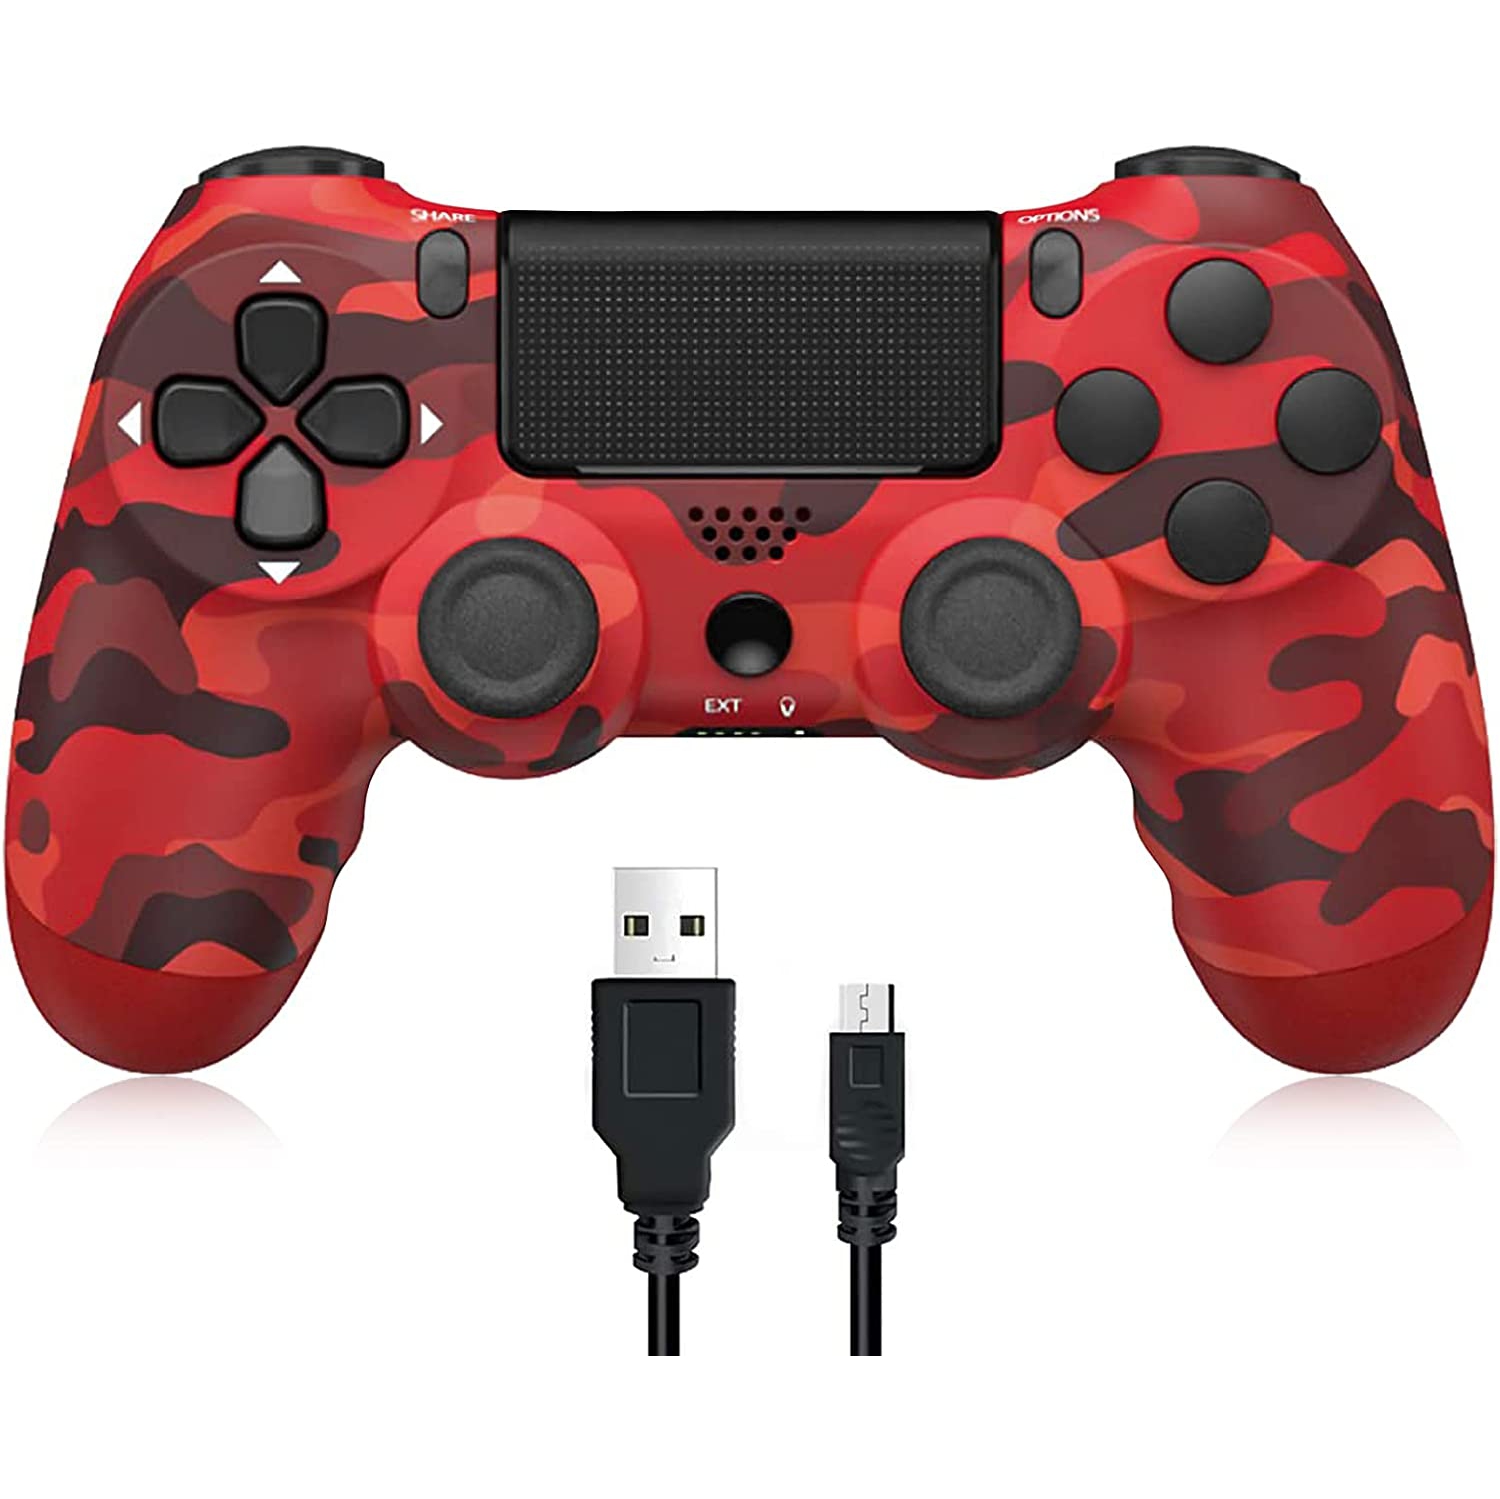 [2022 Upgraded Joystick] Wireless Controller for PS4 Playstation 4/PS4 Pro/Slim Console with Touch Panel and Double Shock (Camo Red)